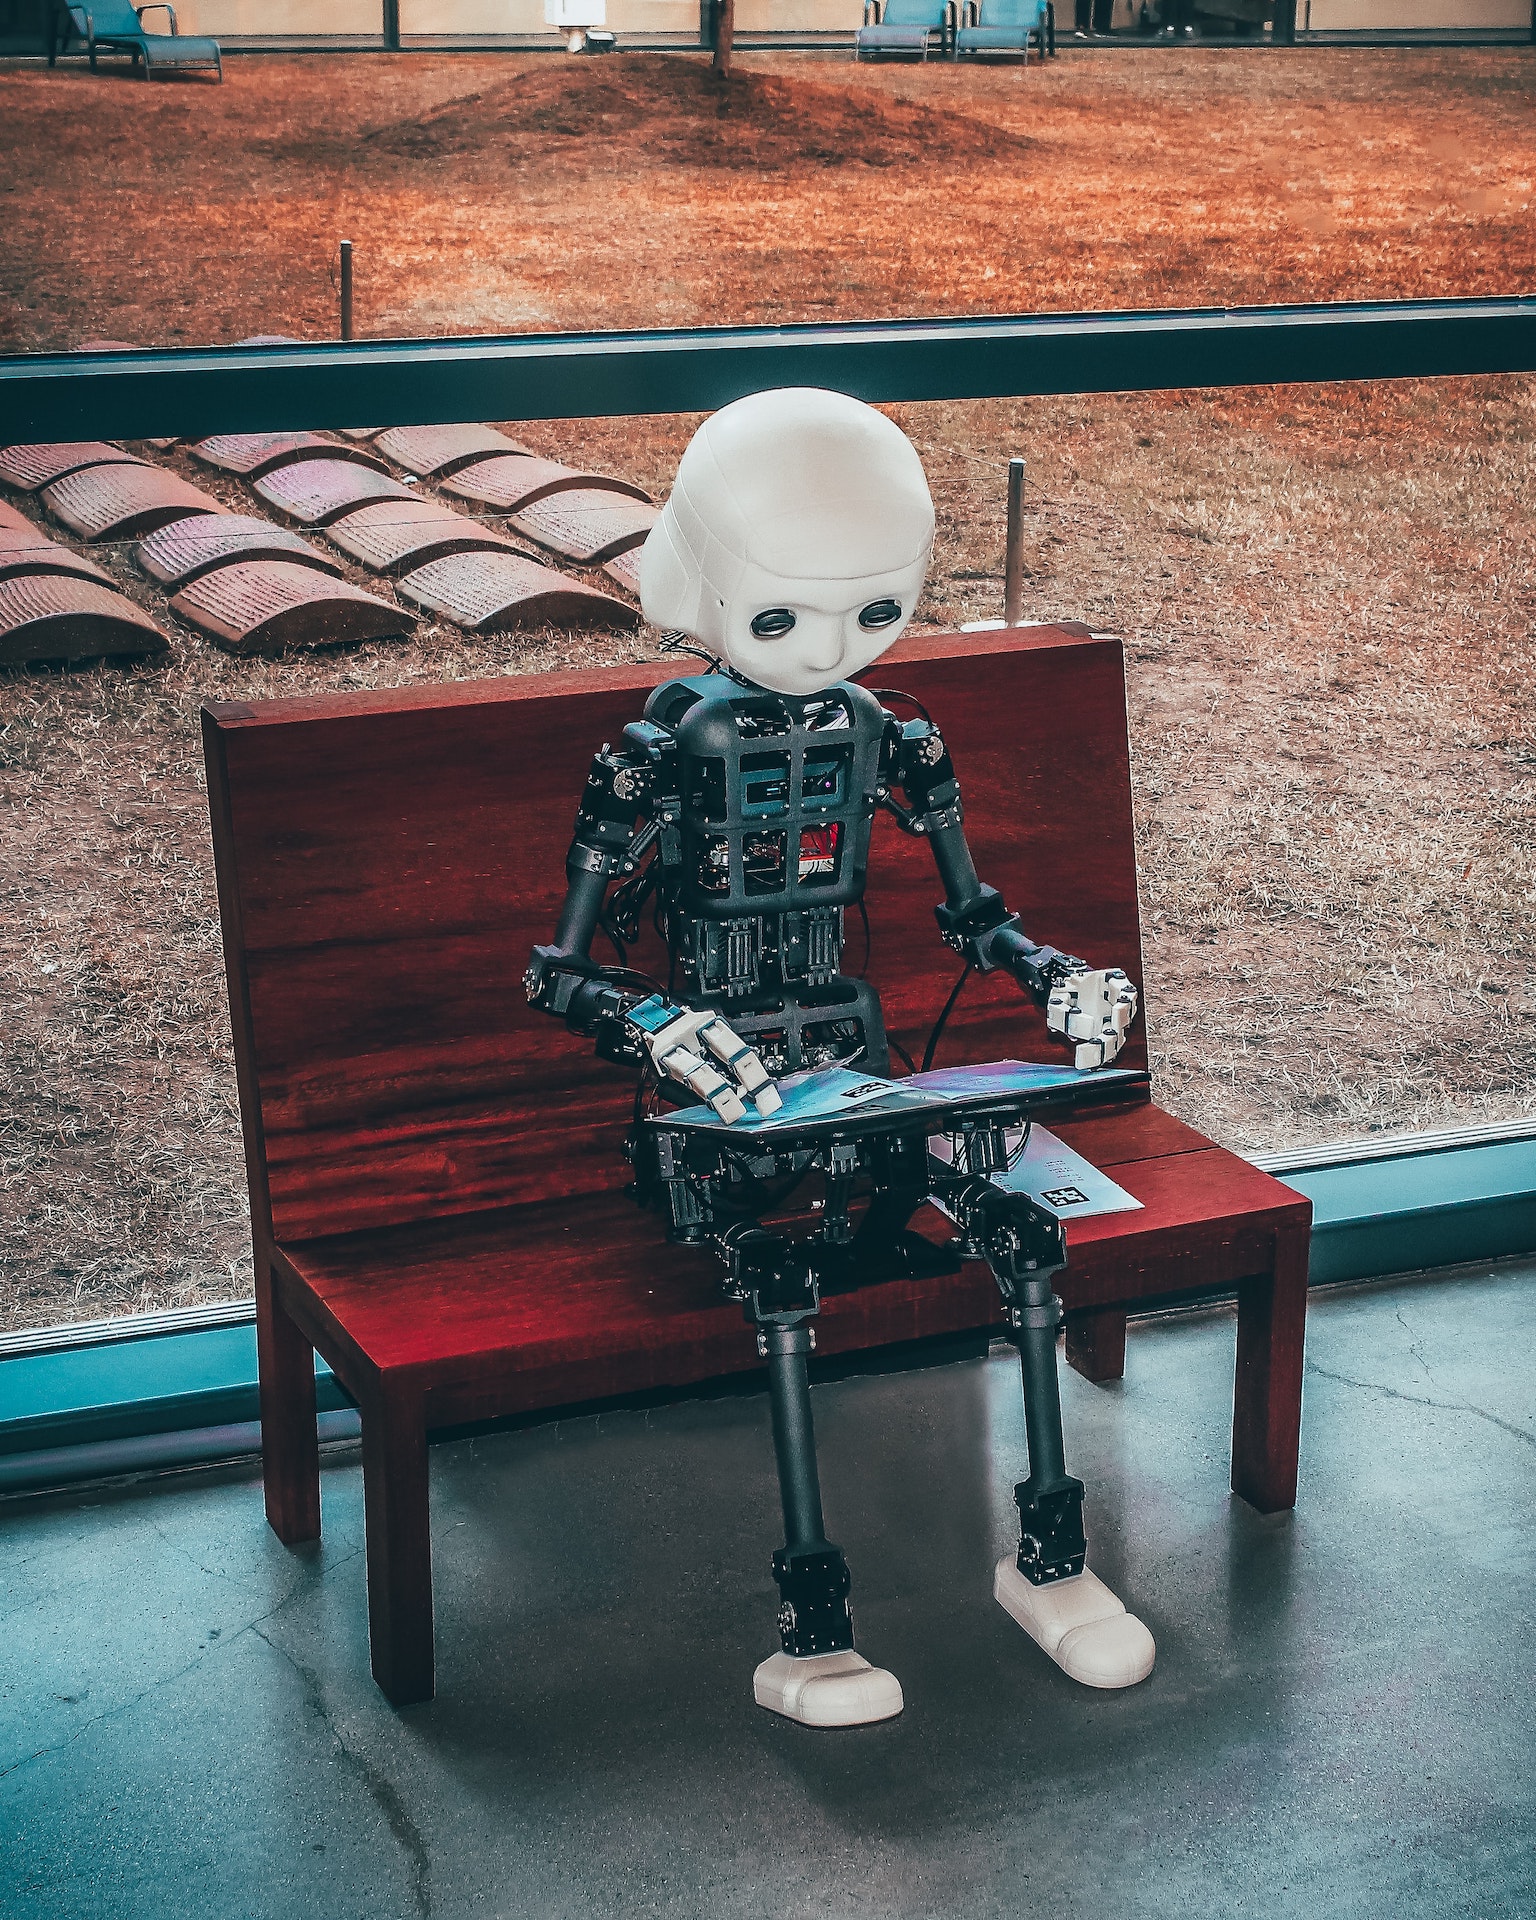 How Artificial Intelligence (AI) Can Help, or Hurt, Your Writing by @BadRedheadMedia #AI #ArtificialIntelligence #writing